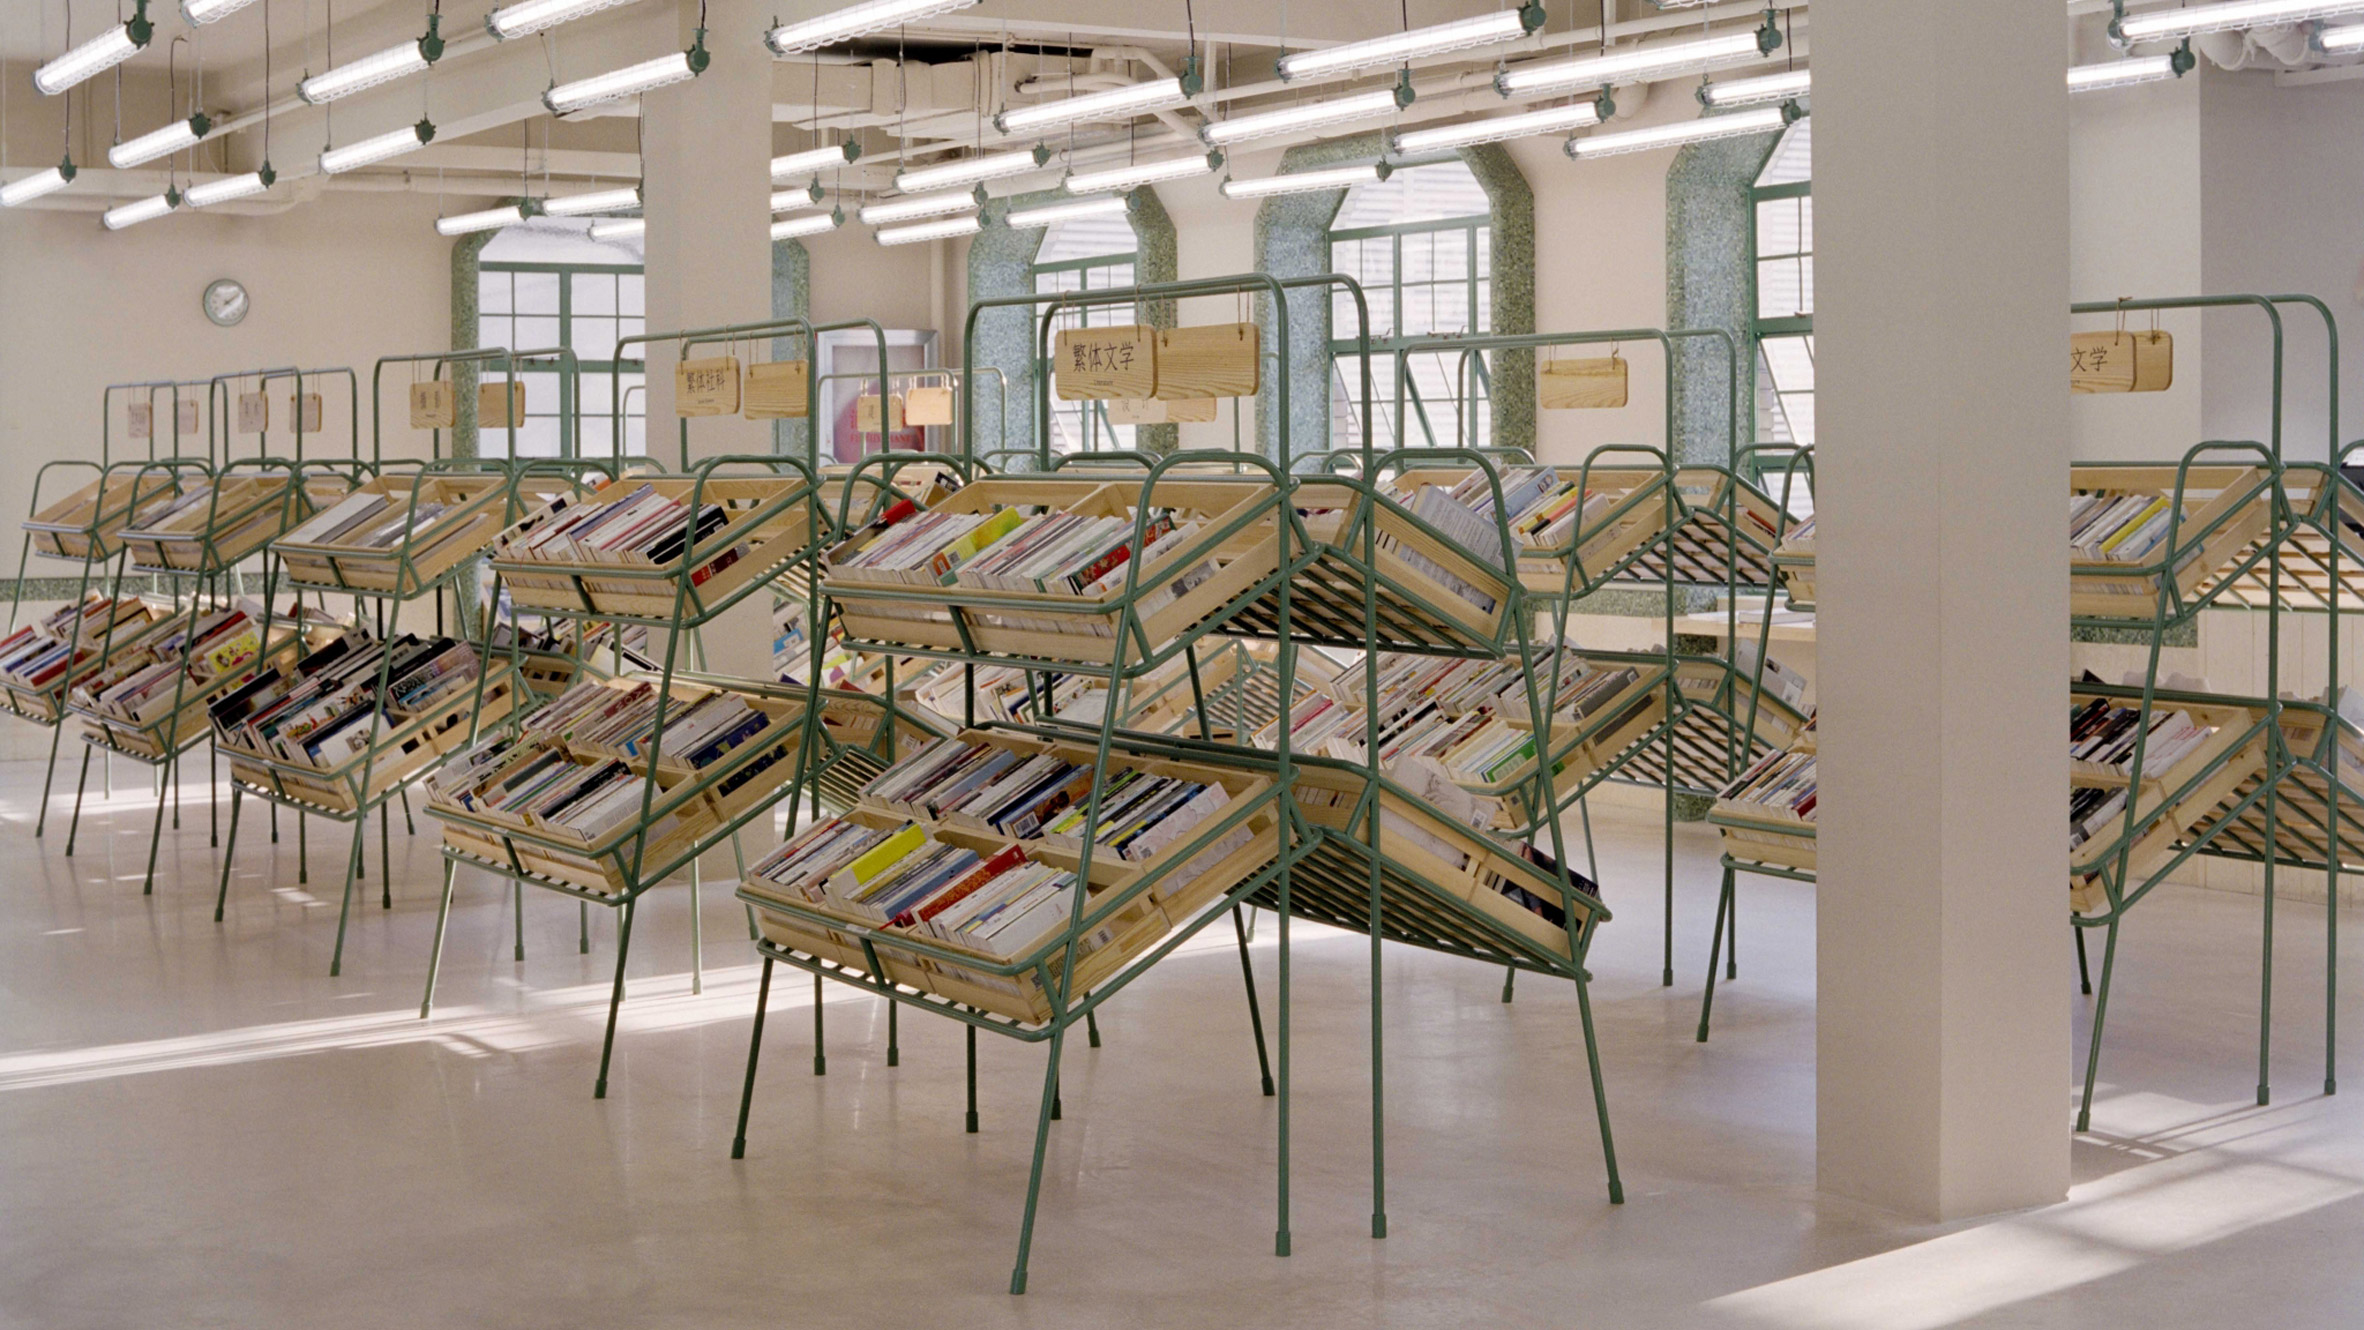 Supermarket-style shelves holding books in Deja Vu Recycle Store in Shanghai by Offhand Practice